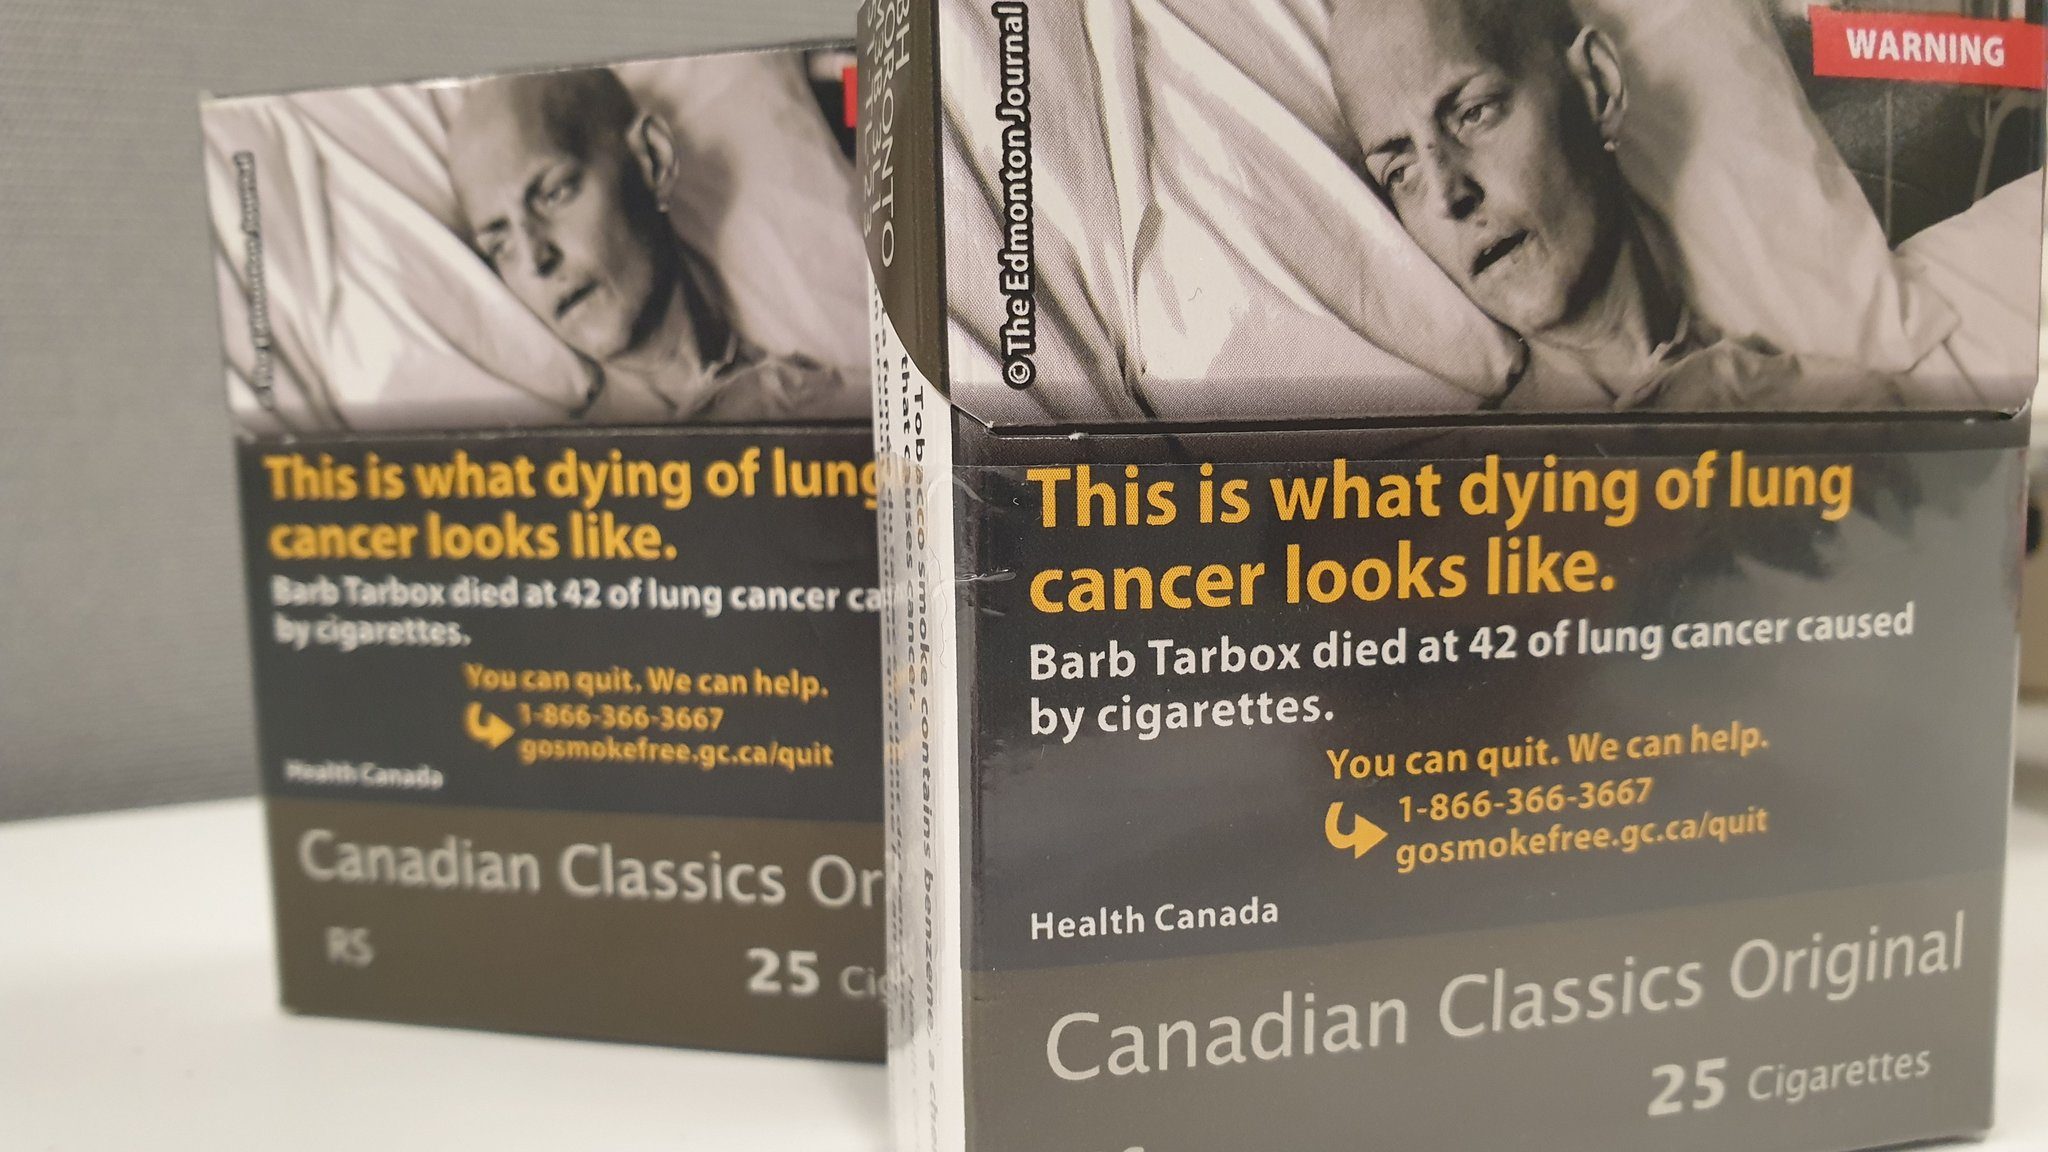 New Cigarette Packaging Is Hitting The Shelves But Will It Help Smokers Kick The Habit